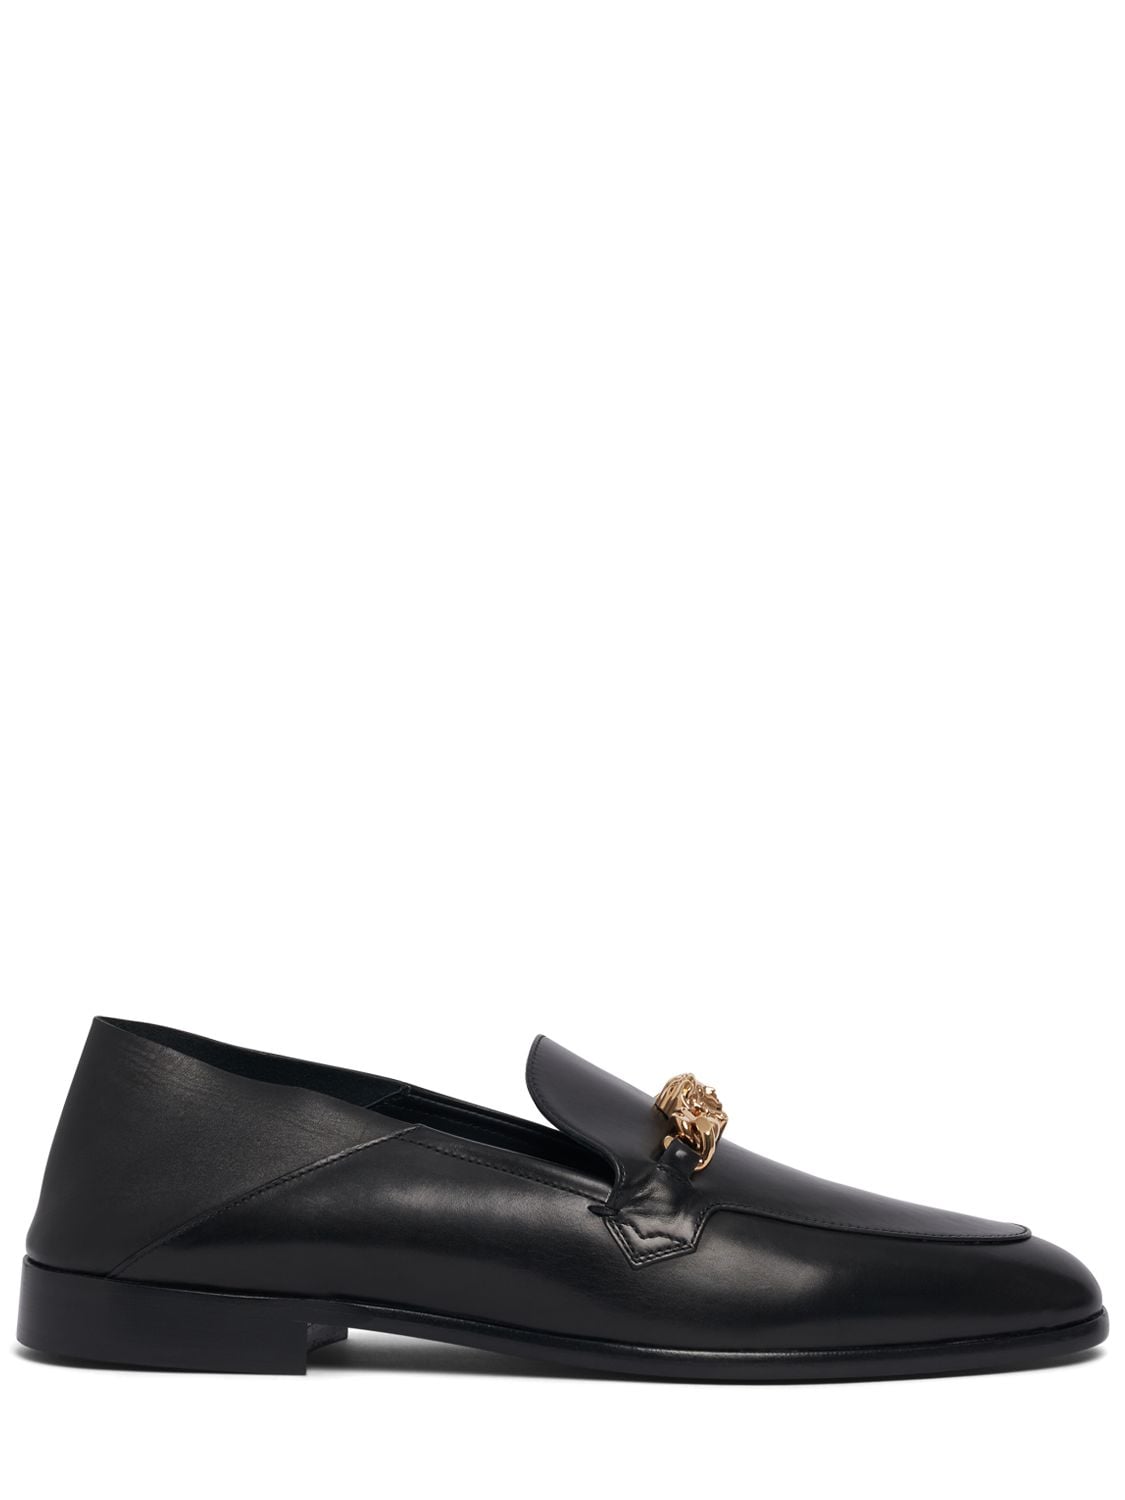 VERSACE Chain Leather Loafers